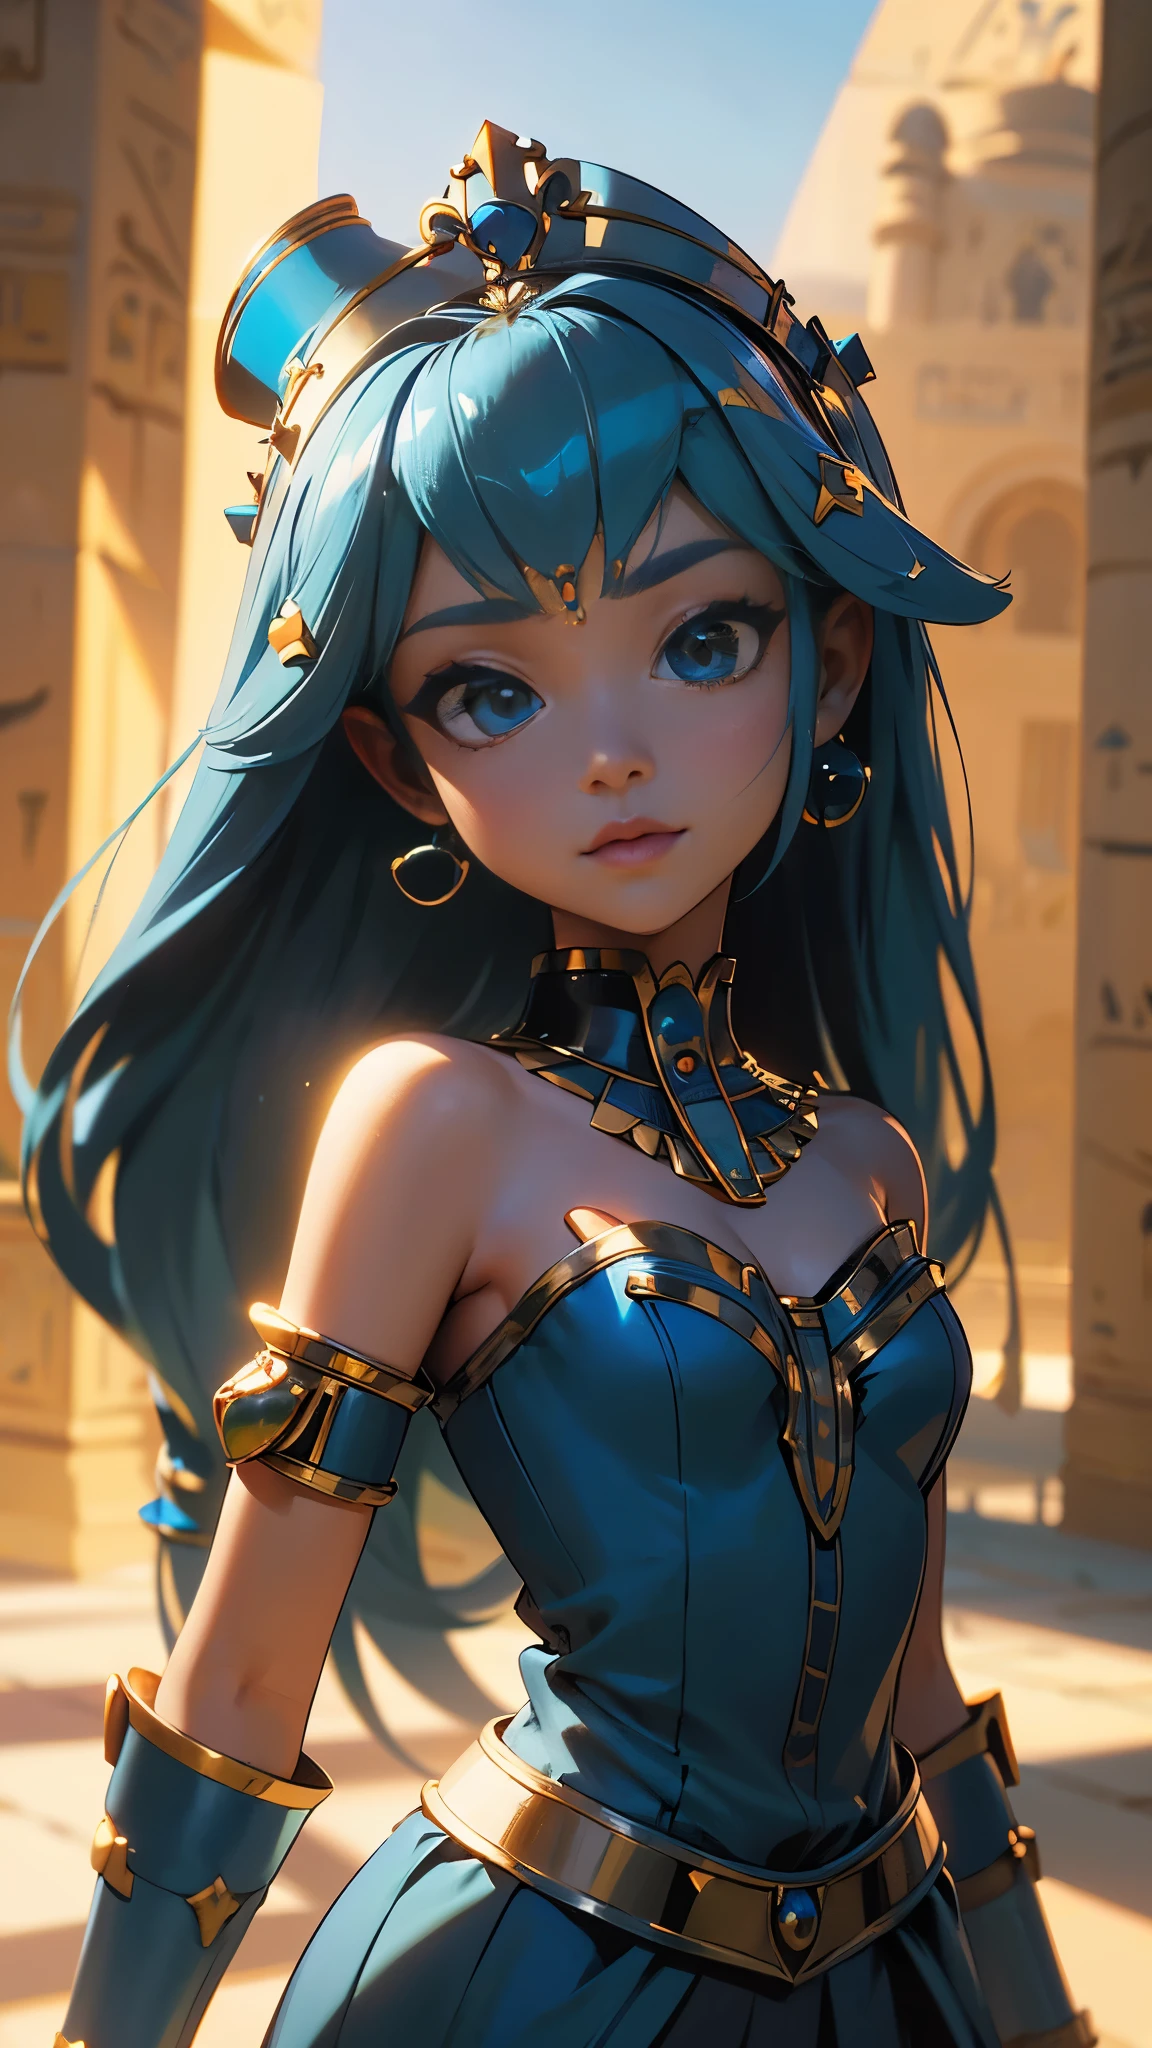 (La Best Quality,A high resolution,Ultra - detailed,actual),Ariana Grande in Cleopatra Pharaoh costume ,princess egypt, (Egypt palace background),More detailed 8K.unreal engine:1.4,UHD,La Best Quality:1.4, photorealistic:1.4, skin texture:1.4, masterpiece:1.8,first work, Best Quality,object object], (detailed face features:1.3),(The correct proportions),convex，(camel toes)，(princess cleopatra),(Beautiful blue eyes) ,(blue water background), (cleopatra pharaoh:1.4) 